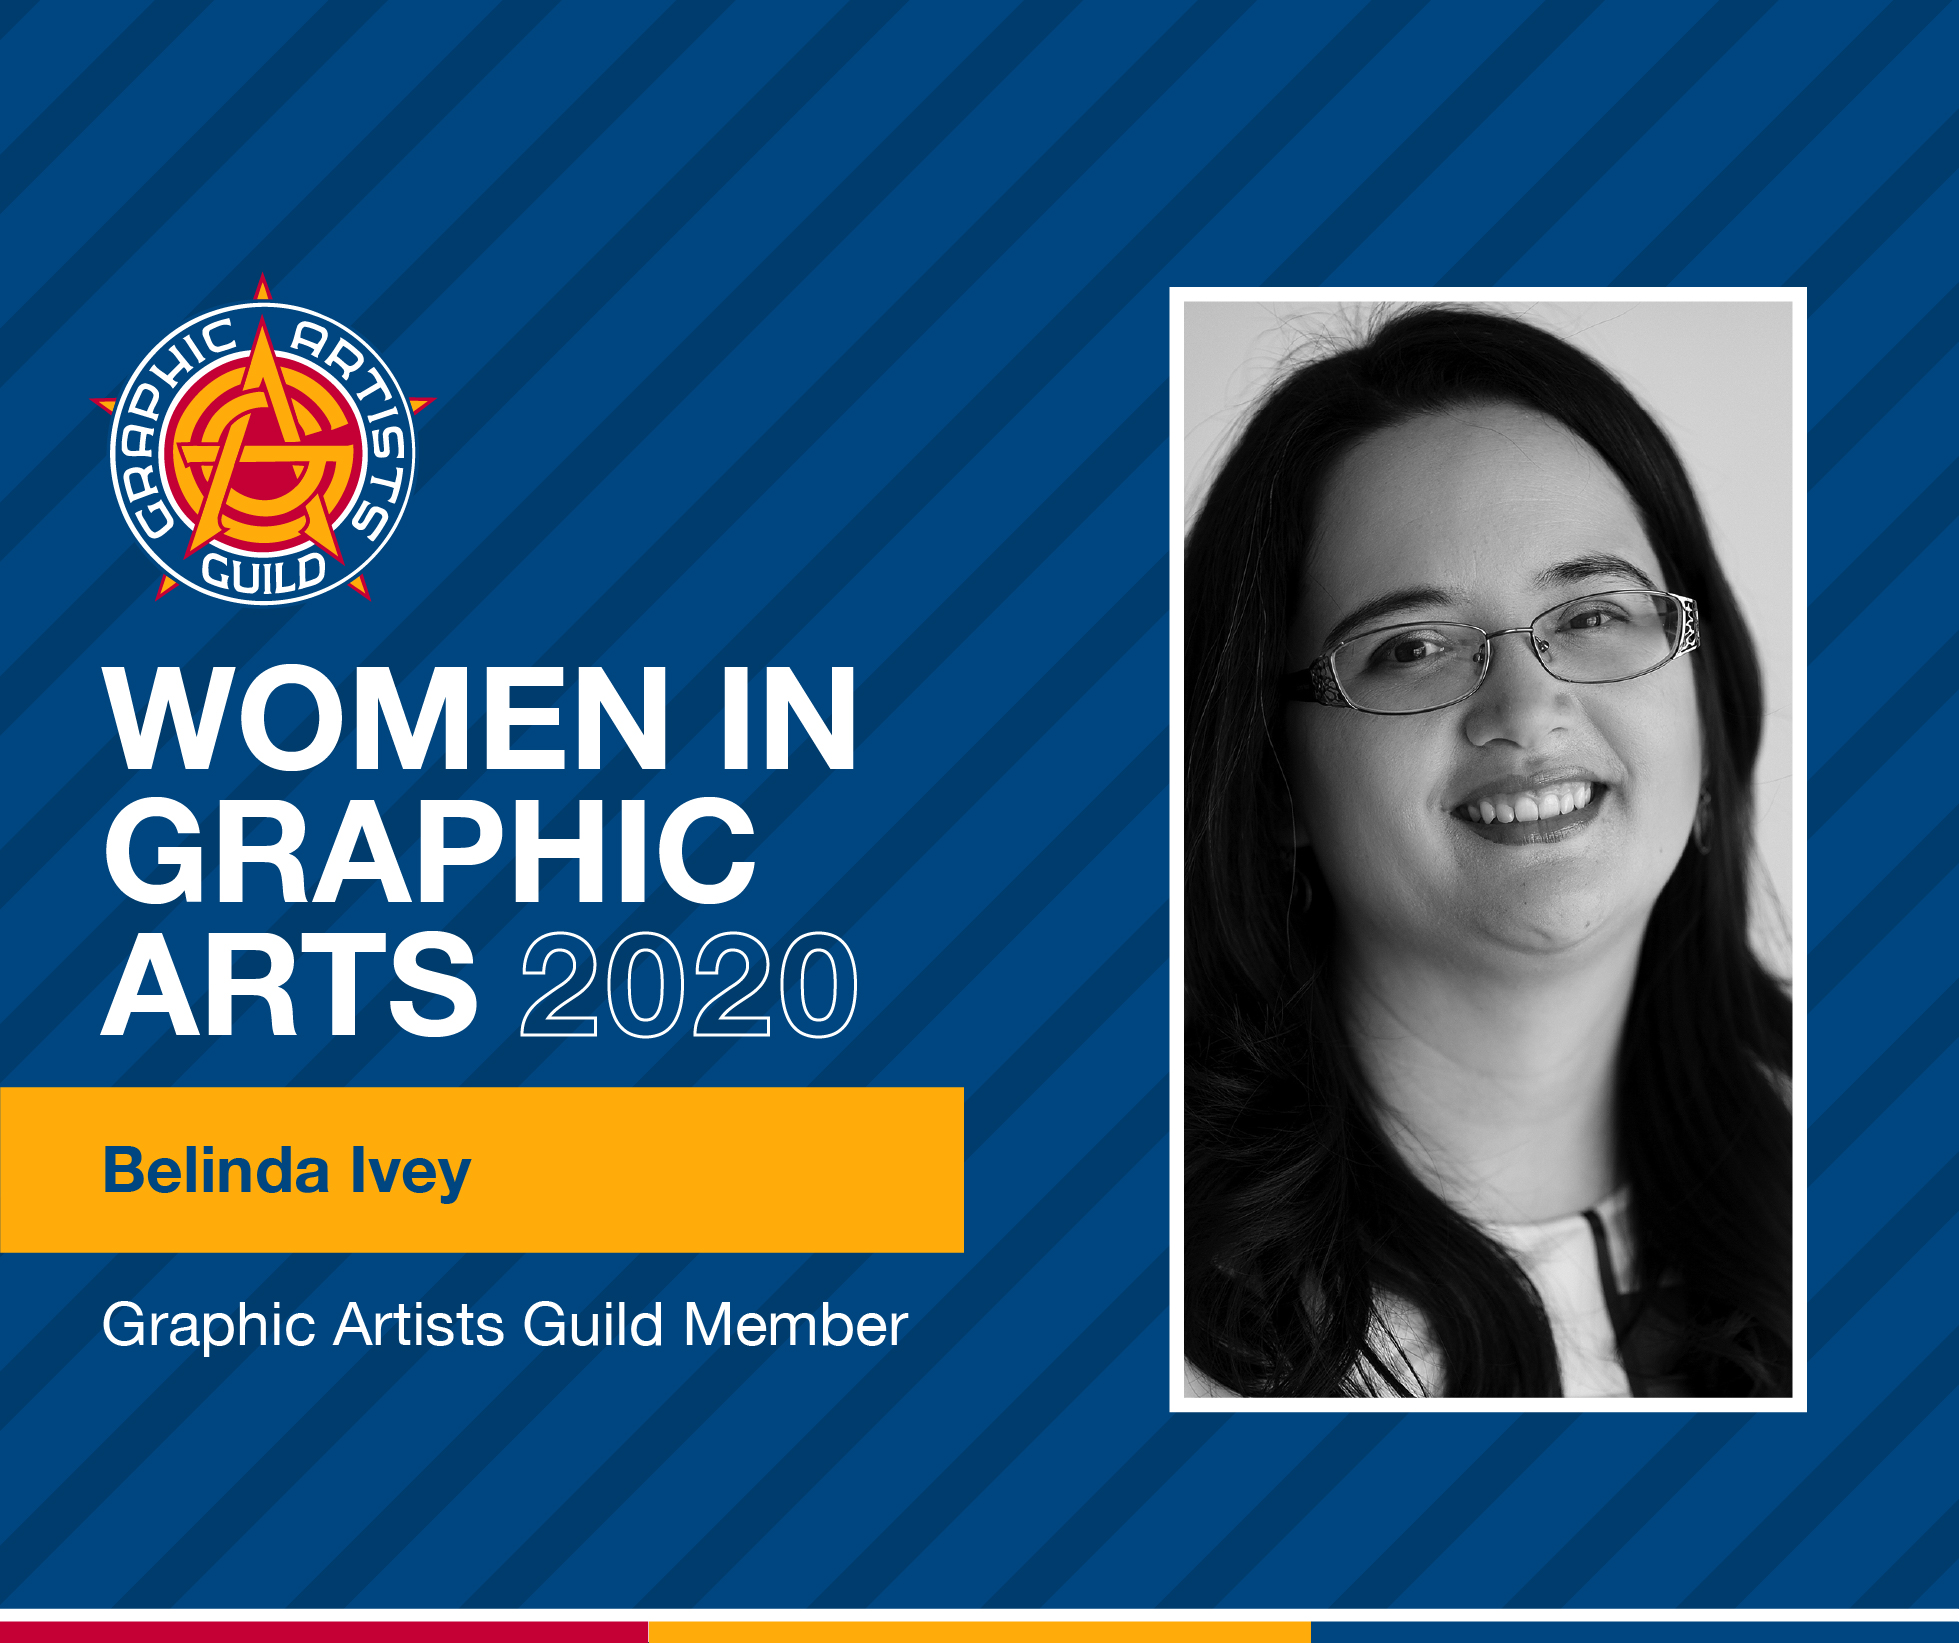 Women in graphic arts image